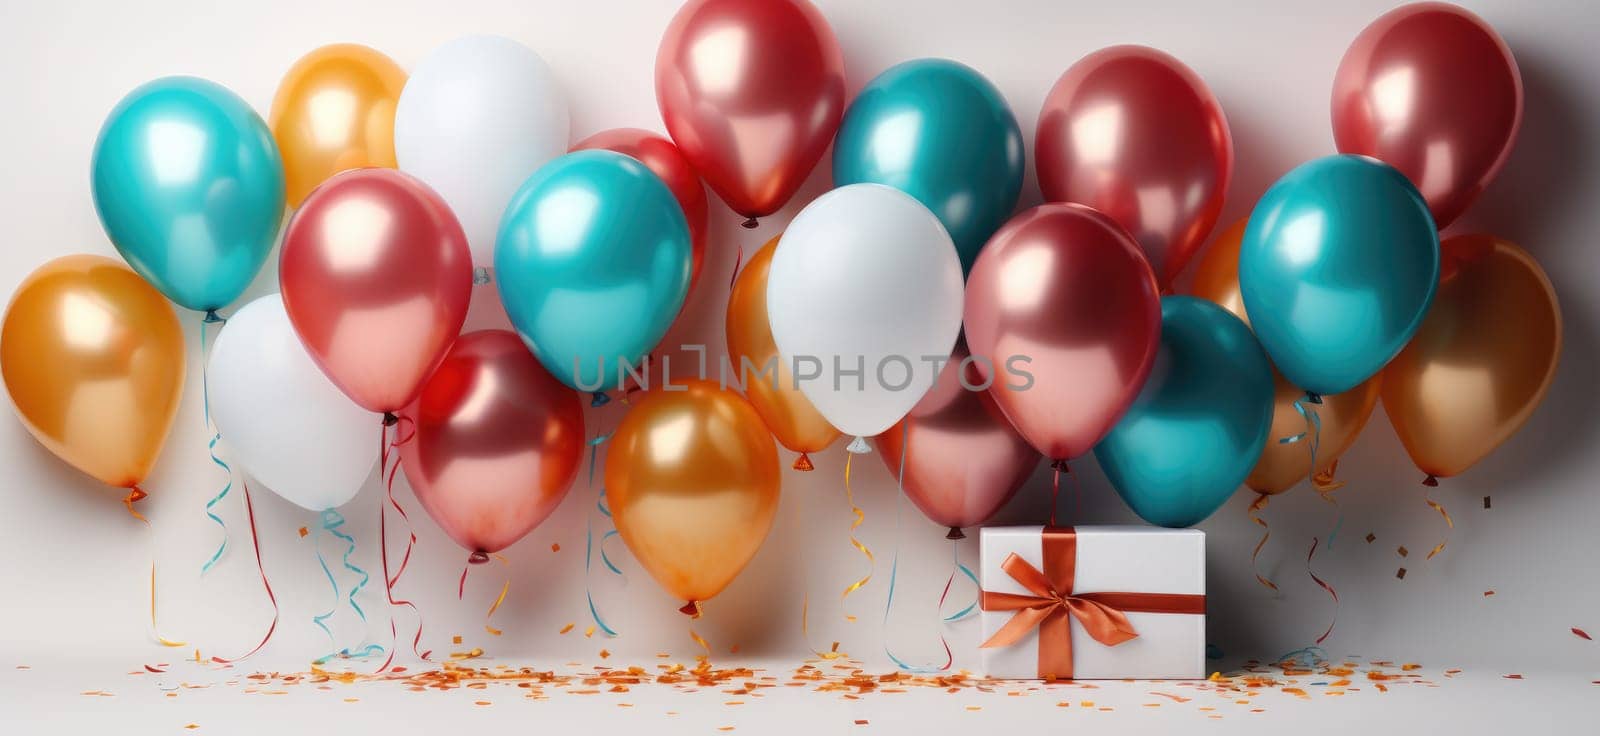 Balloons and falling confetti will bring a lot of joy and happiness.